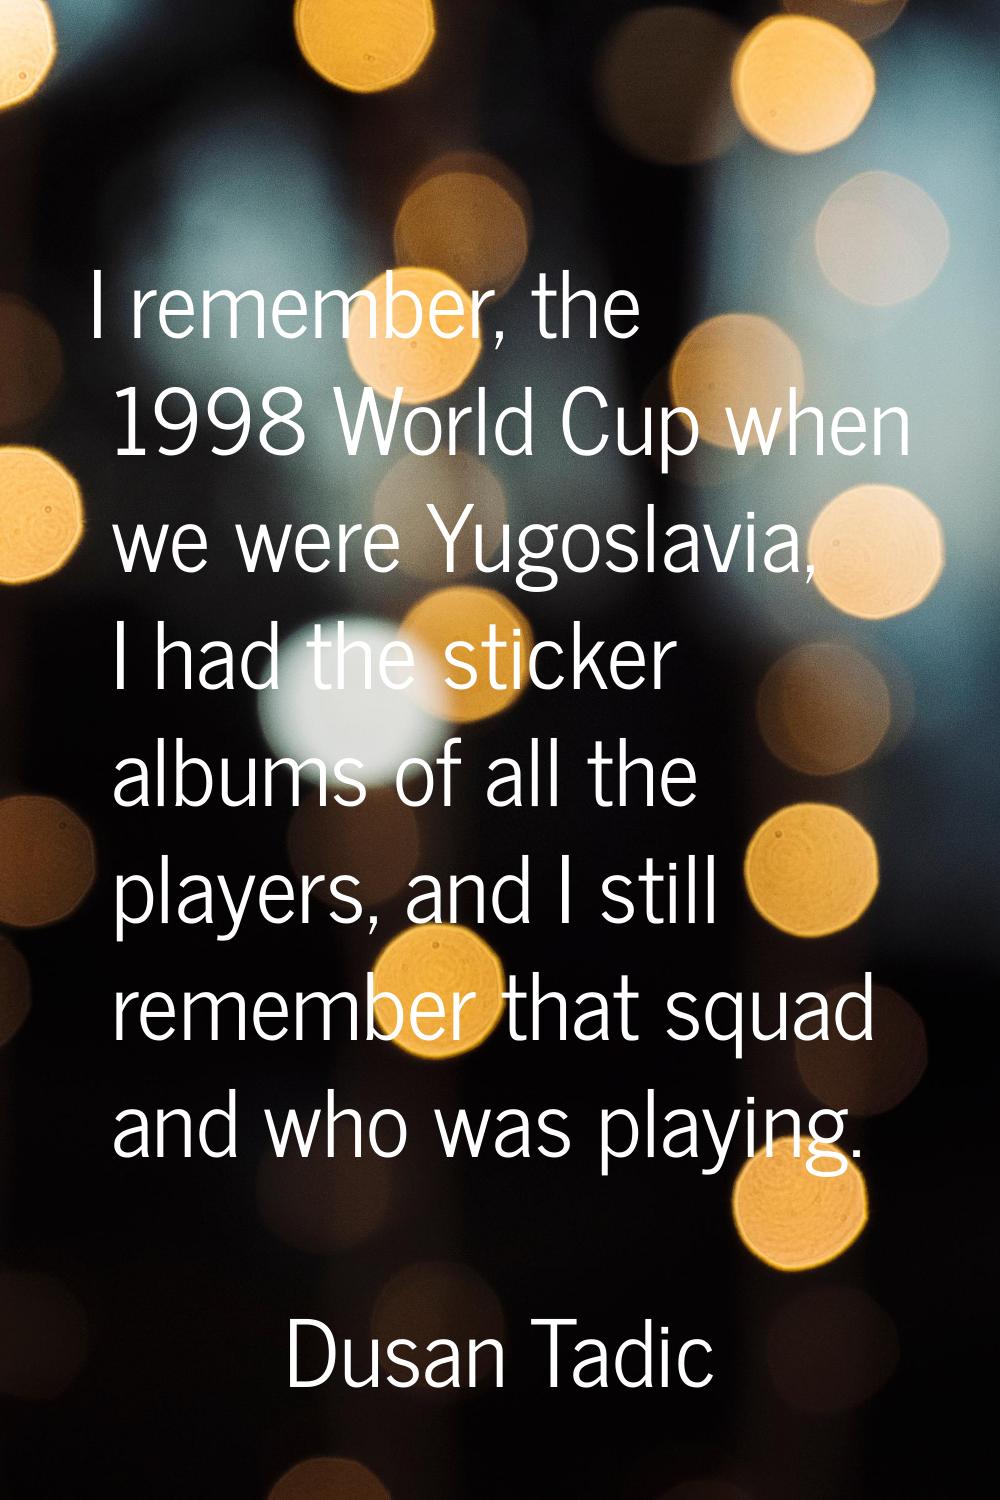 I remember, the 1998 World Cup when we were Yugoslavia, I had the sticker albums of all the players